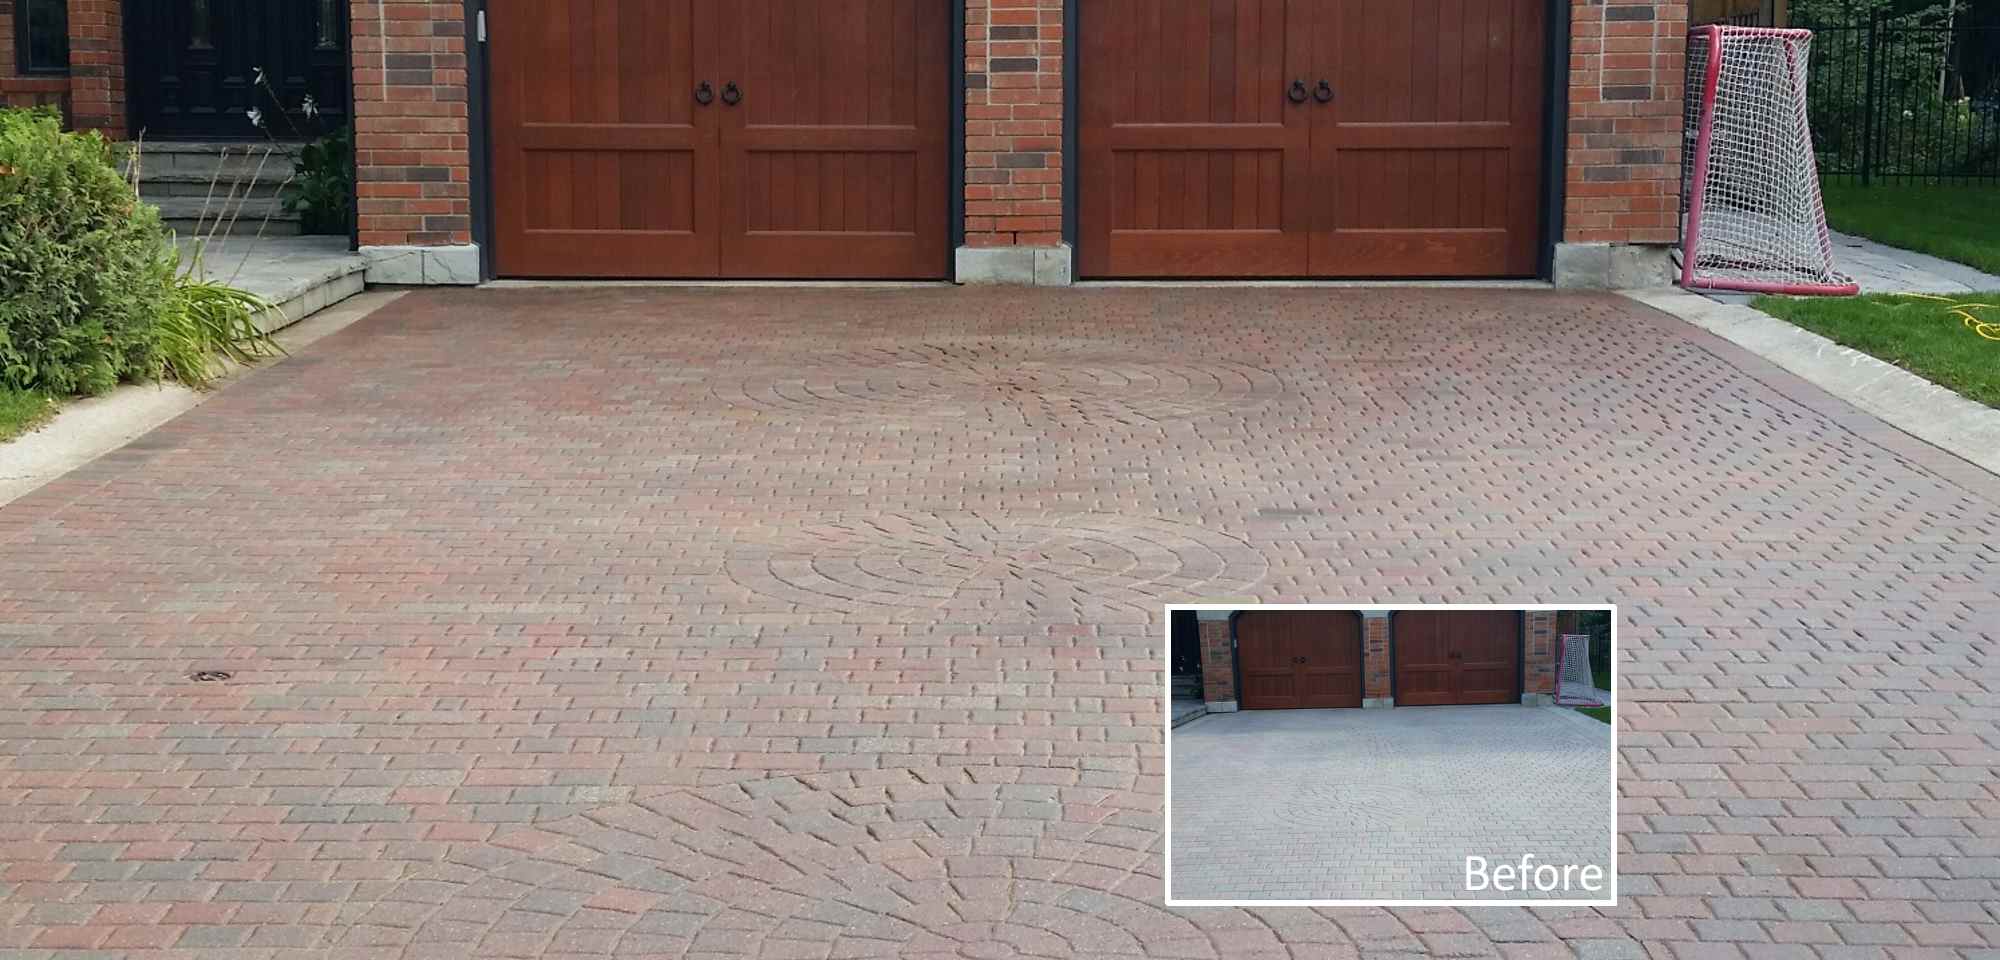 Before and After Sealing Photo of Driveway